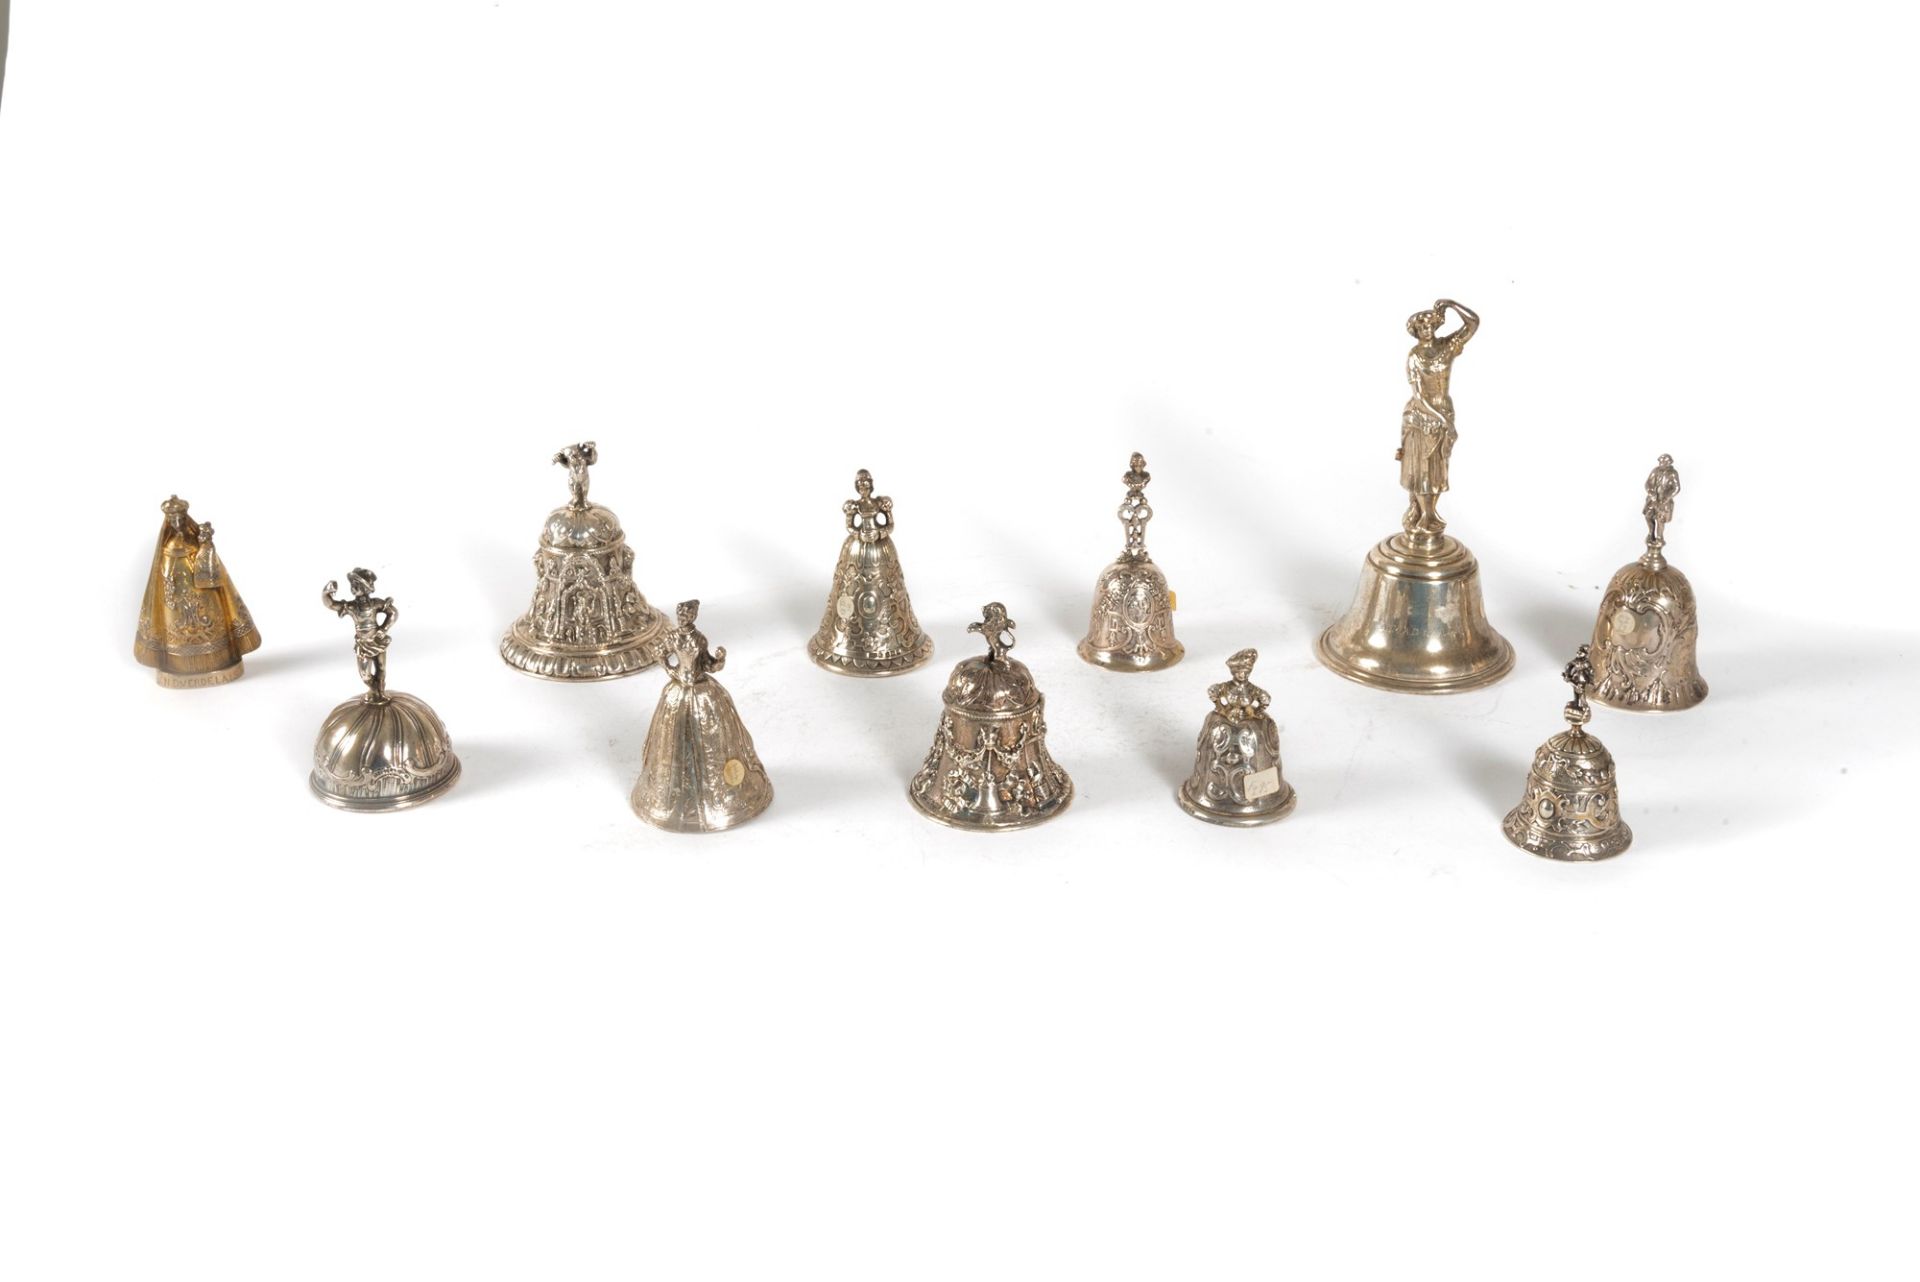 Lot consisting of eleven silver bells, England 19th-20th centuries